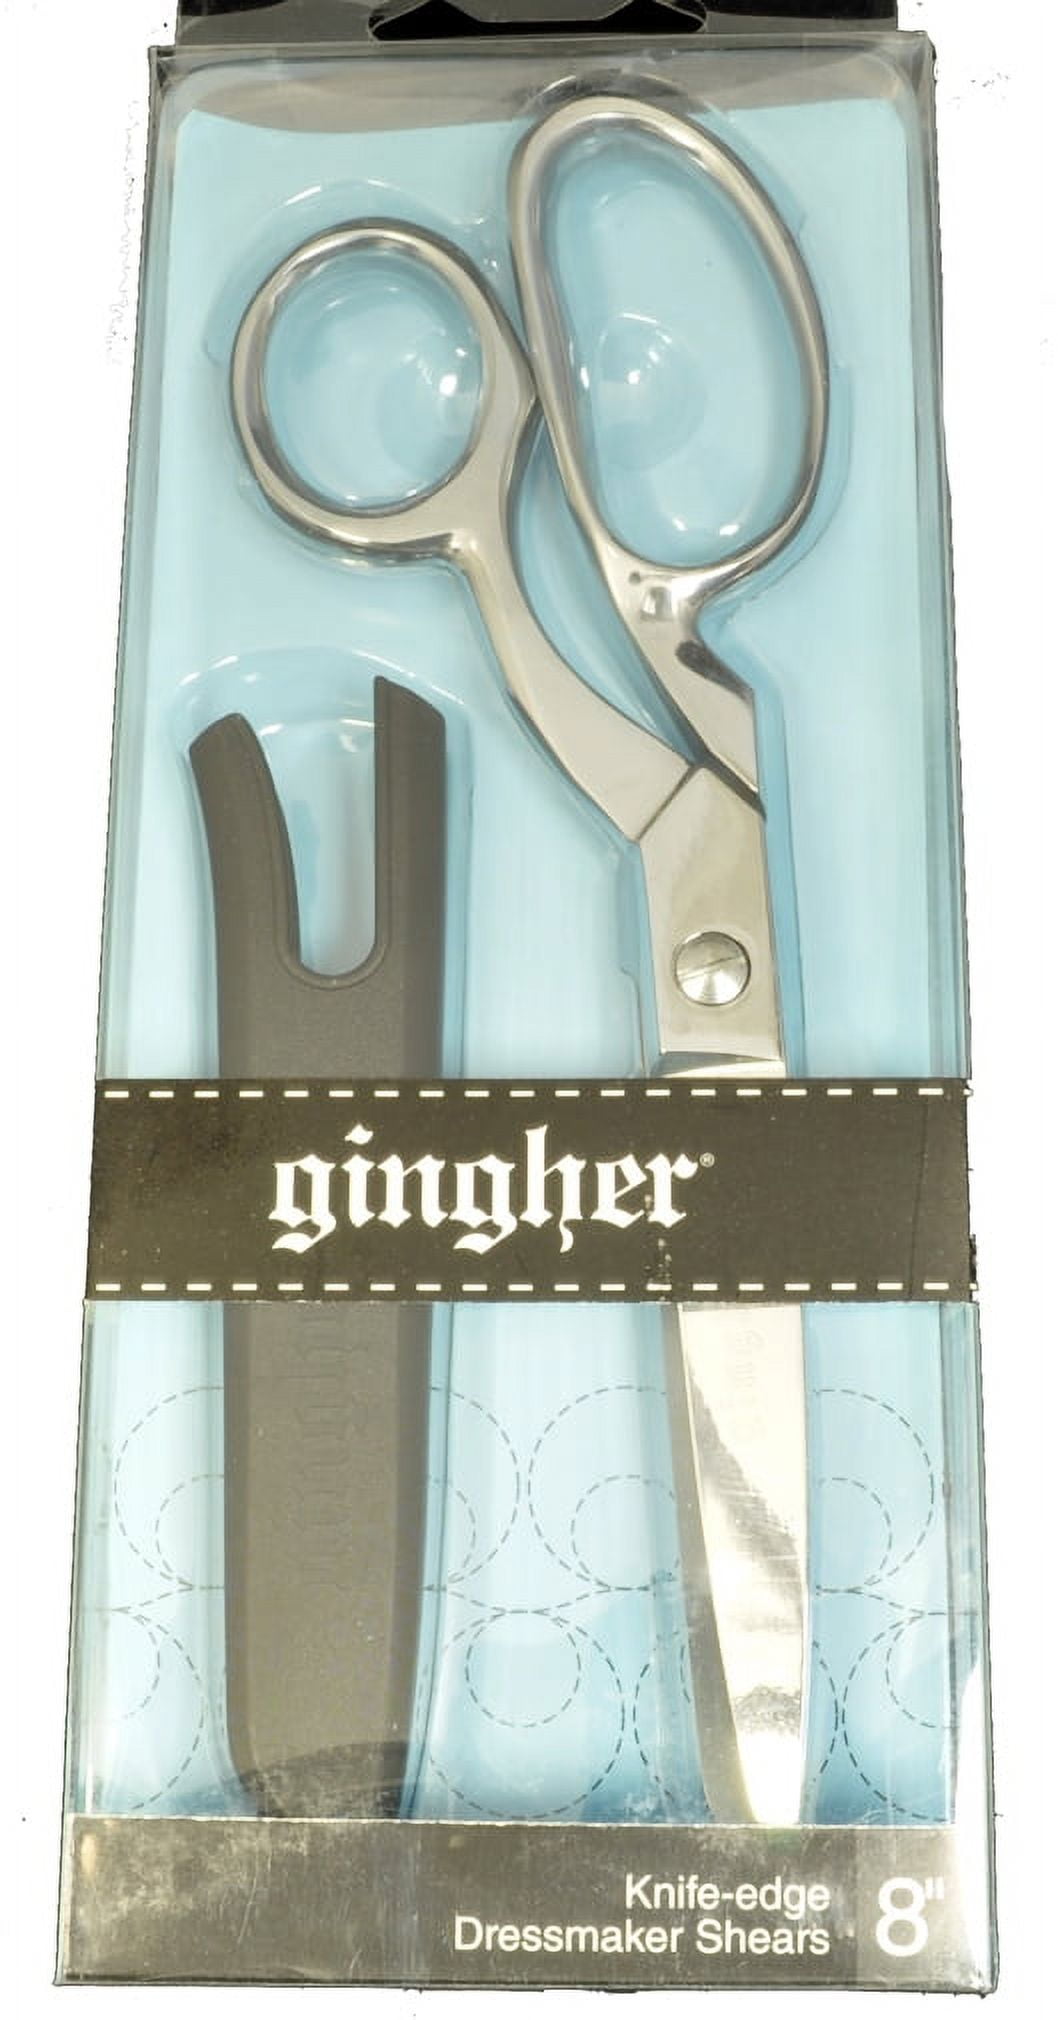 Gingher 7 Inch Knife-Edge Dressmaker Shears - 1000's of Parts